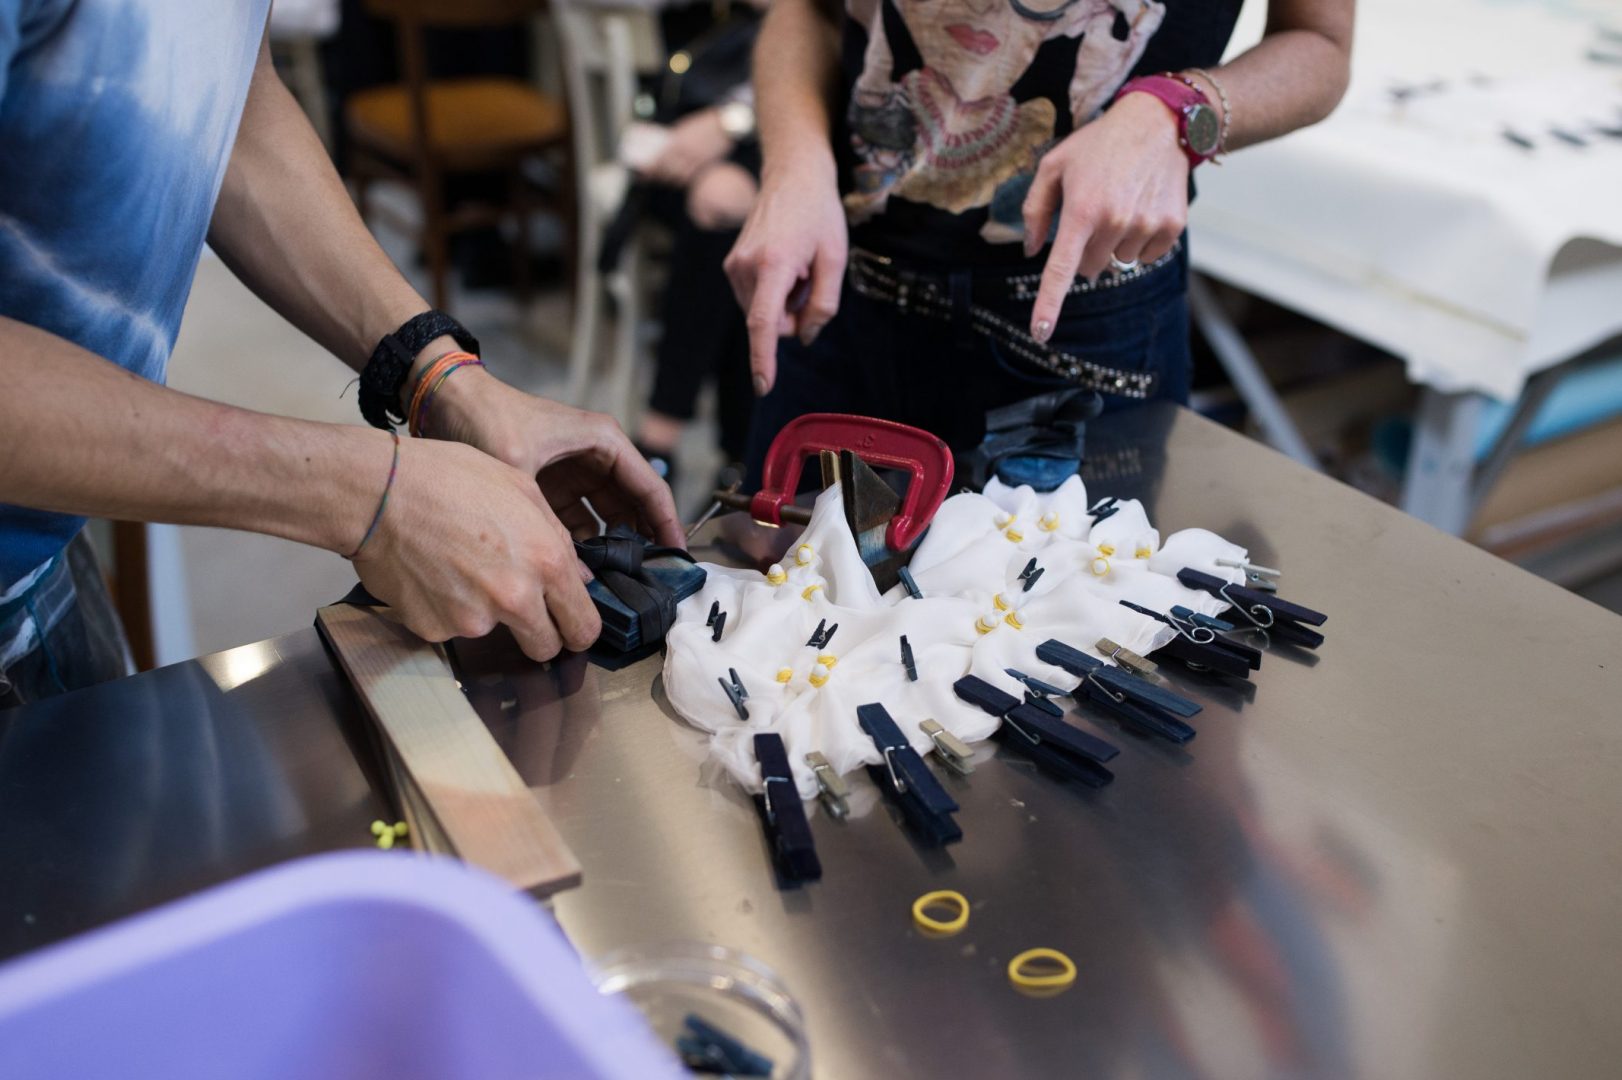 Creation of prototypes and proof of concepts ranging from handcrafts to industrial manufacturing. Photo: Rachele Salvioli